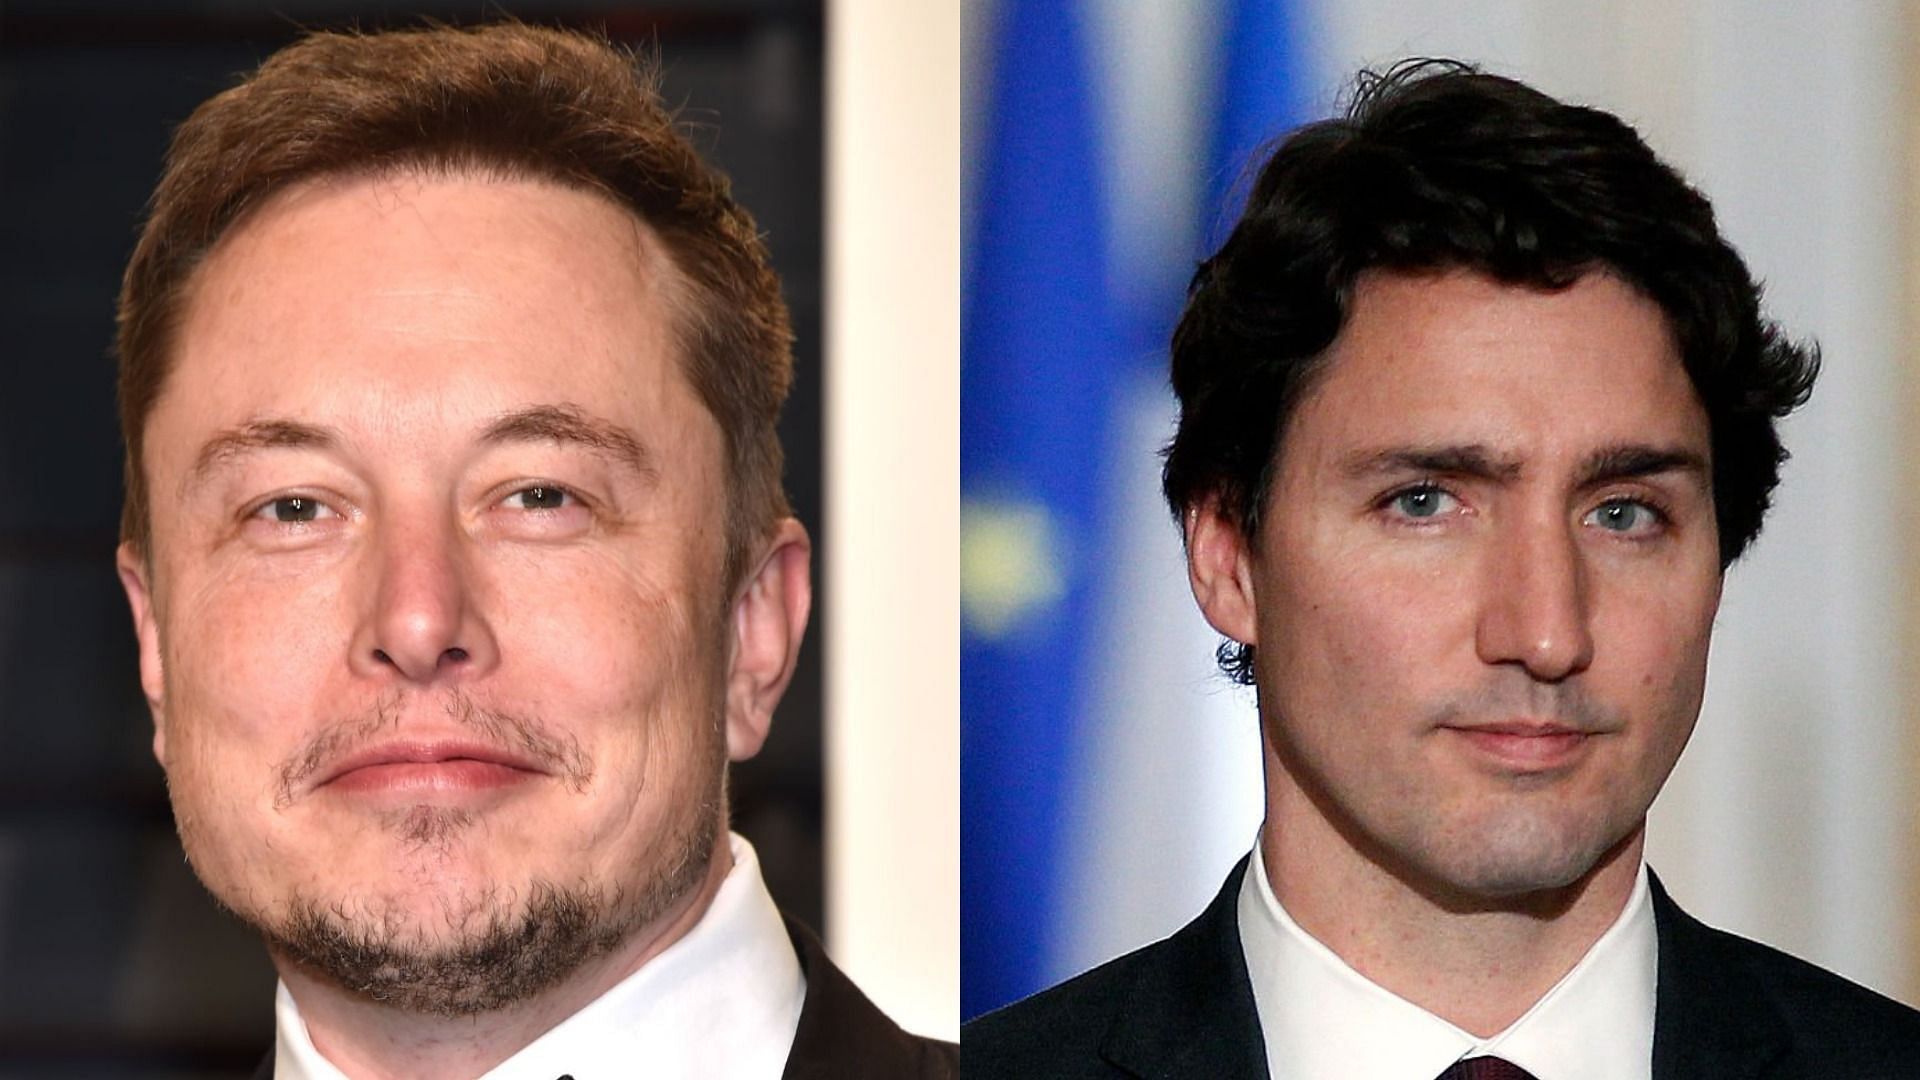 Elon Musk came under fire after comparing Justin Trudeau to Adolf Hitler (Image via Getty Images/Pascal Le Segretain and Chesnot)